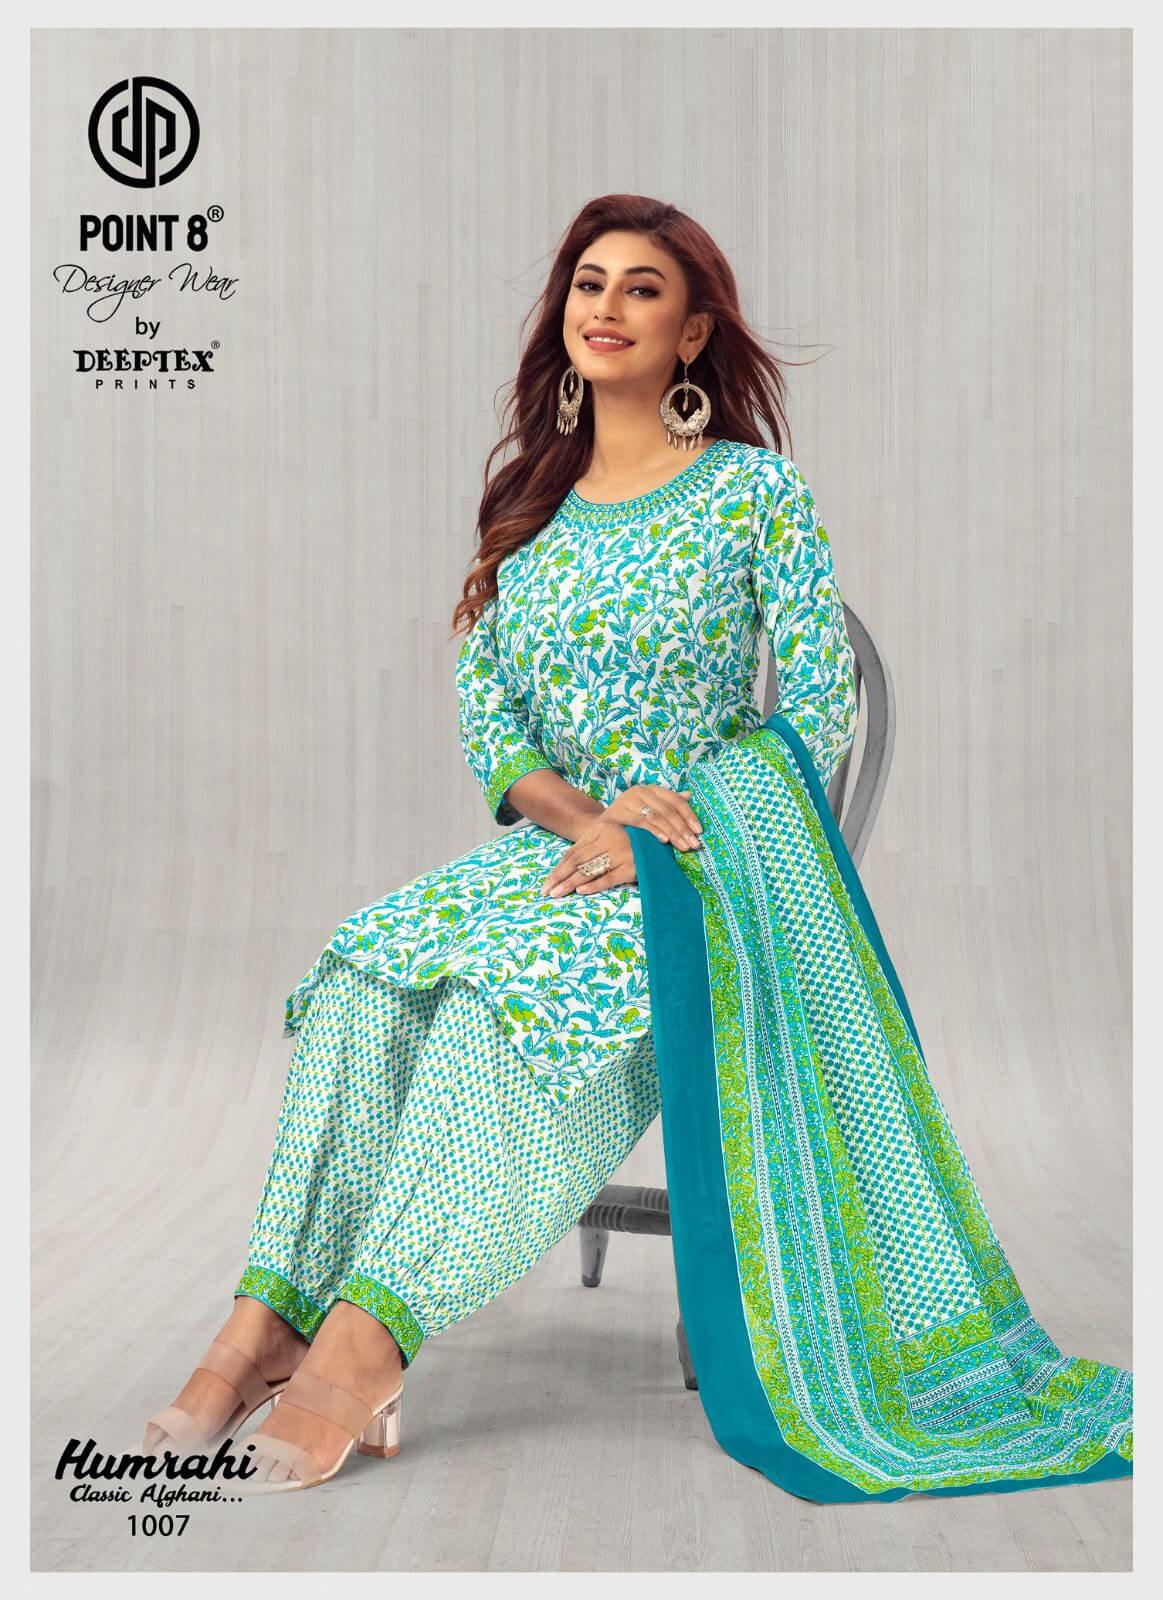 Deeptex Point 8 Humrahi vol 1 collection 8